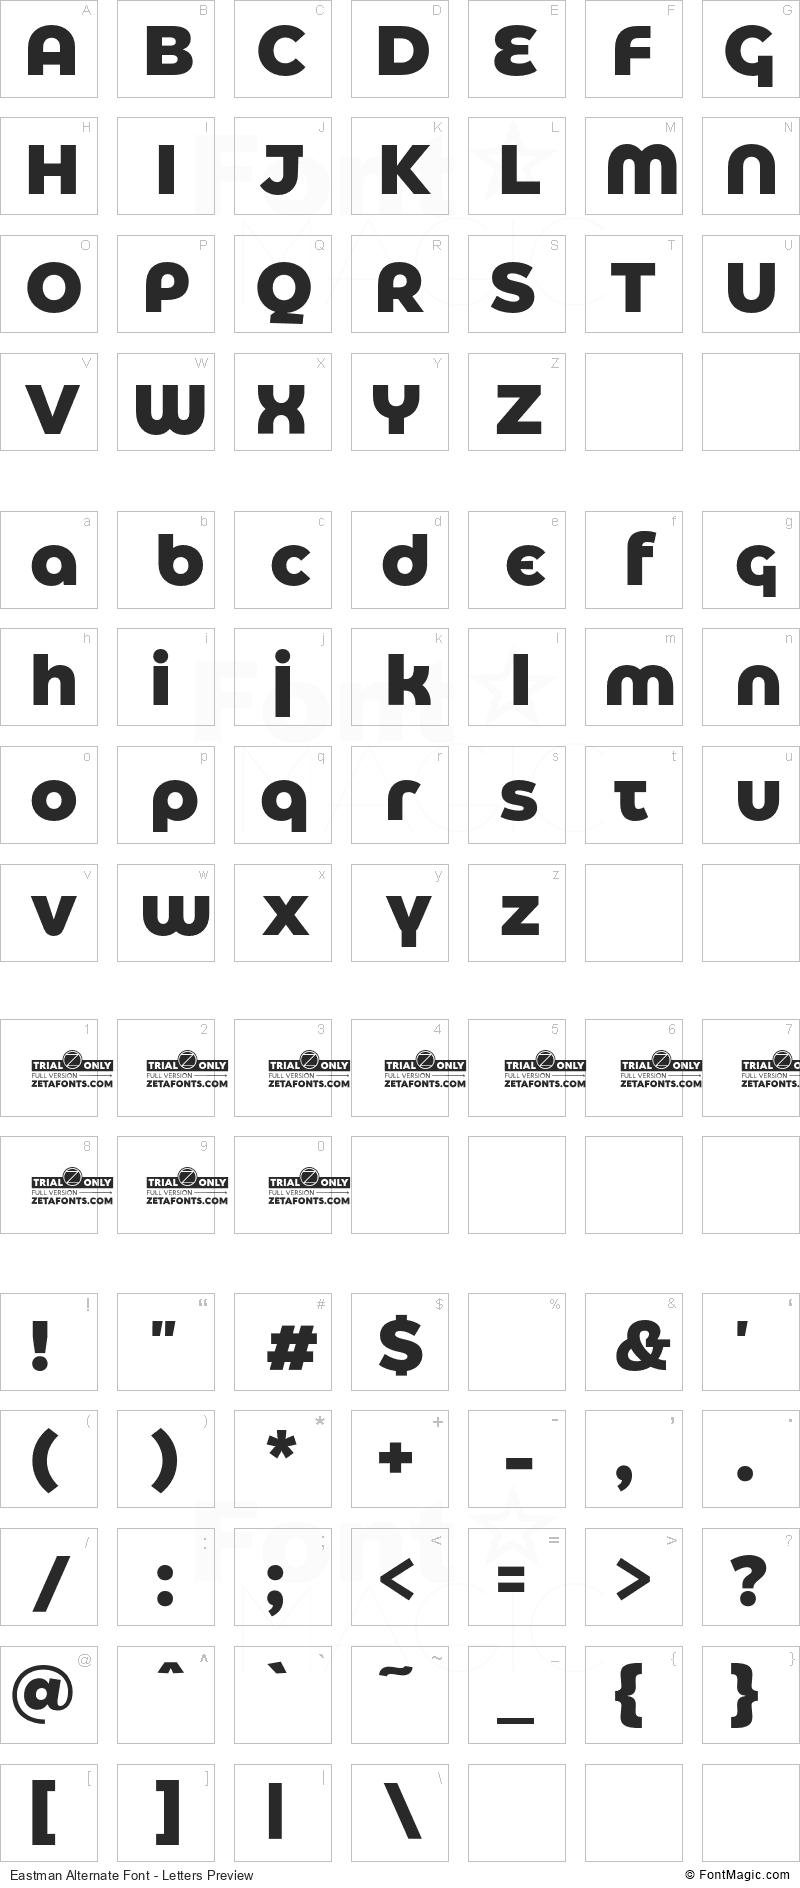 Eastman Alternate Font - All Latters Preview Chart